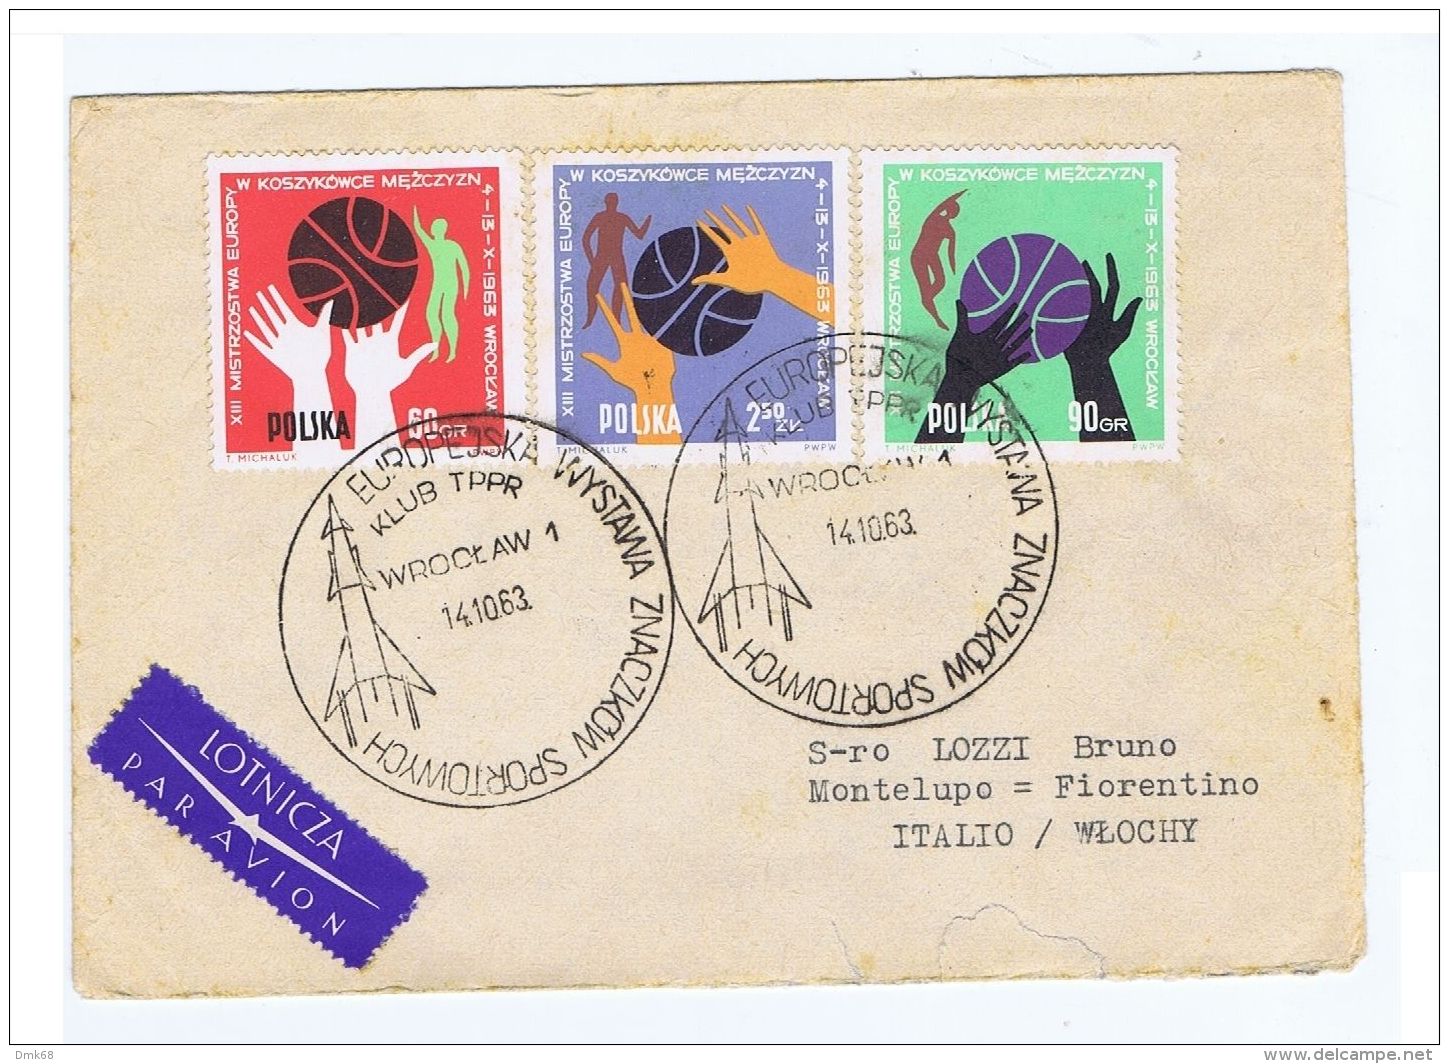 POLAND - COVER -  EUROPEAN EXHIBITION OF SPORTS STAMPS - WROCLAW 1 - 14 OCT. 943 - Errors & Oddities